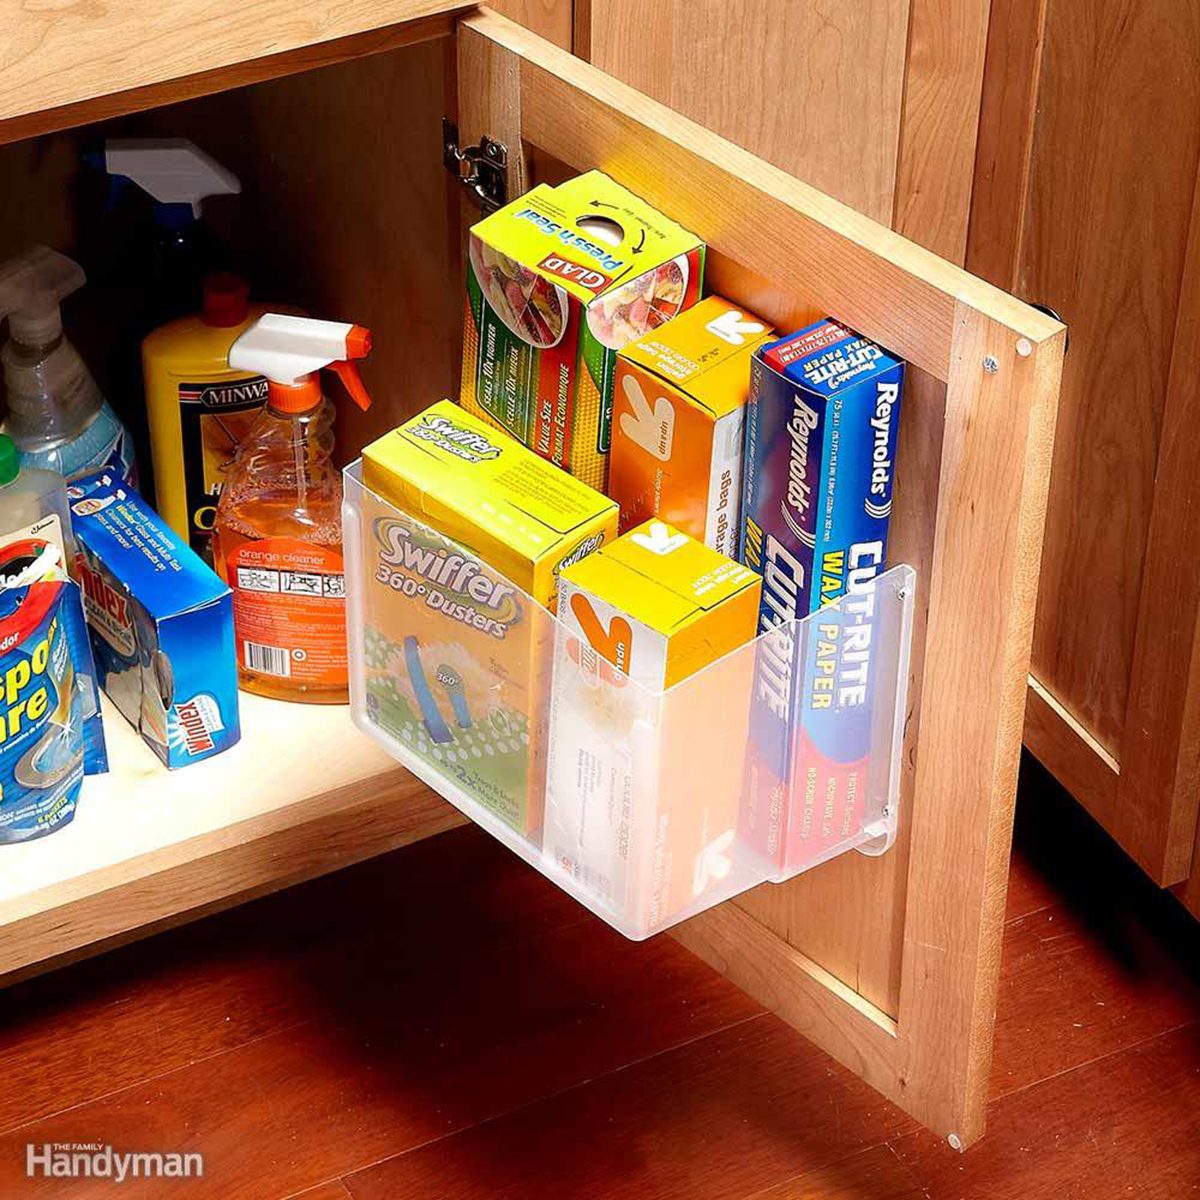 Boxes in a shelf on the door of a cabinet